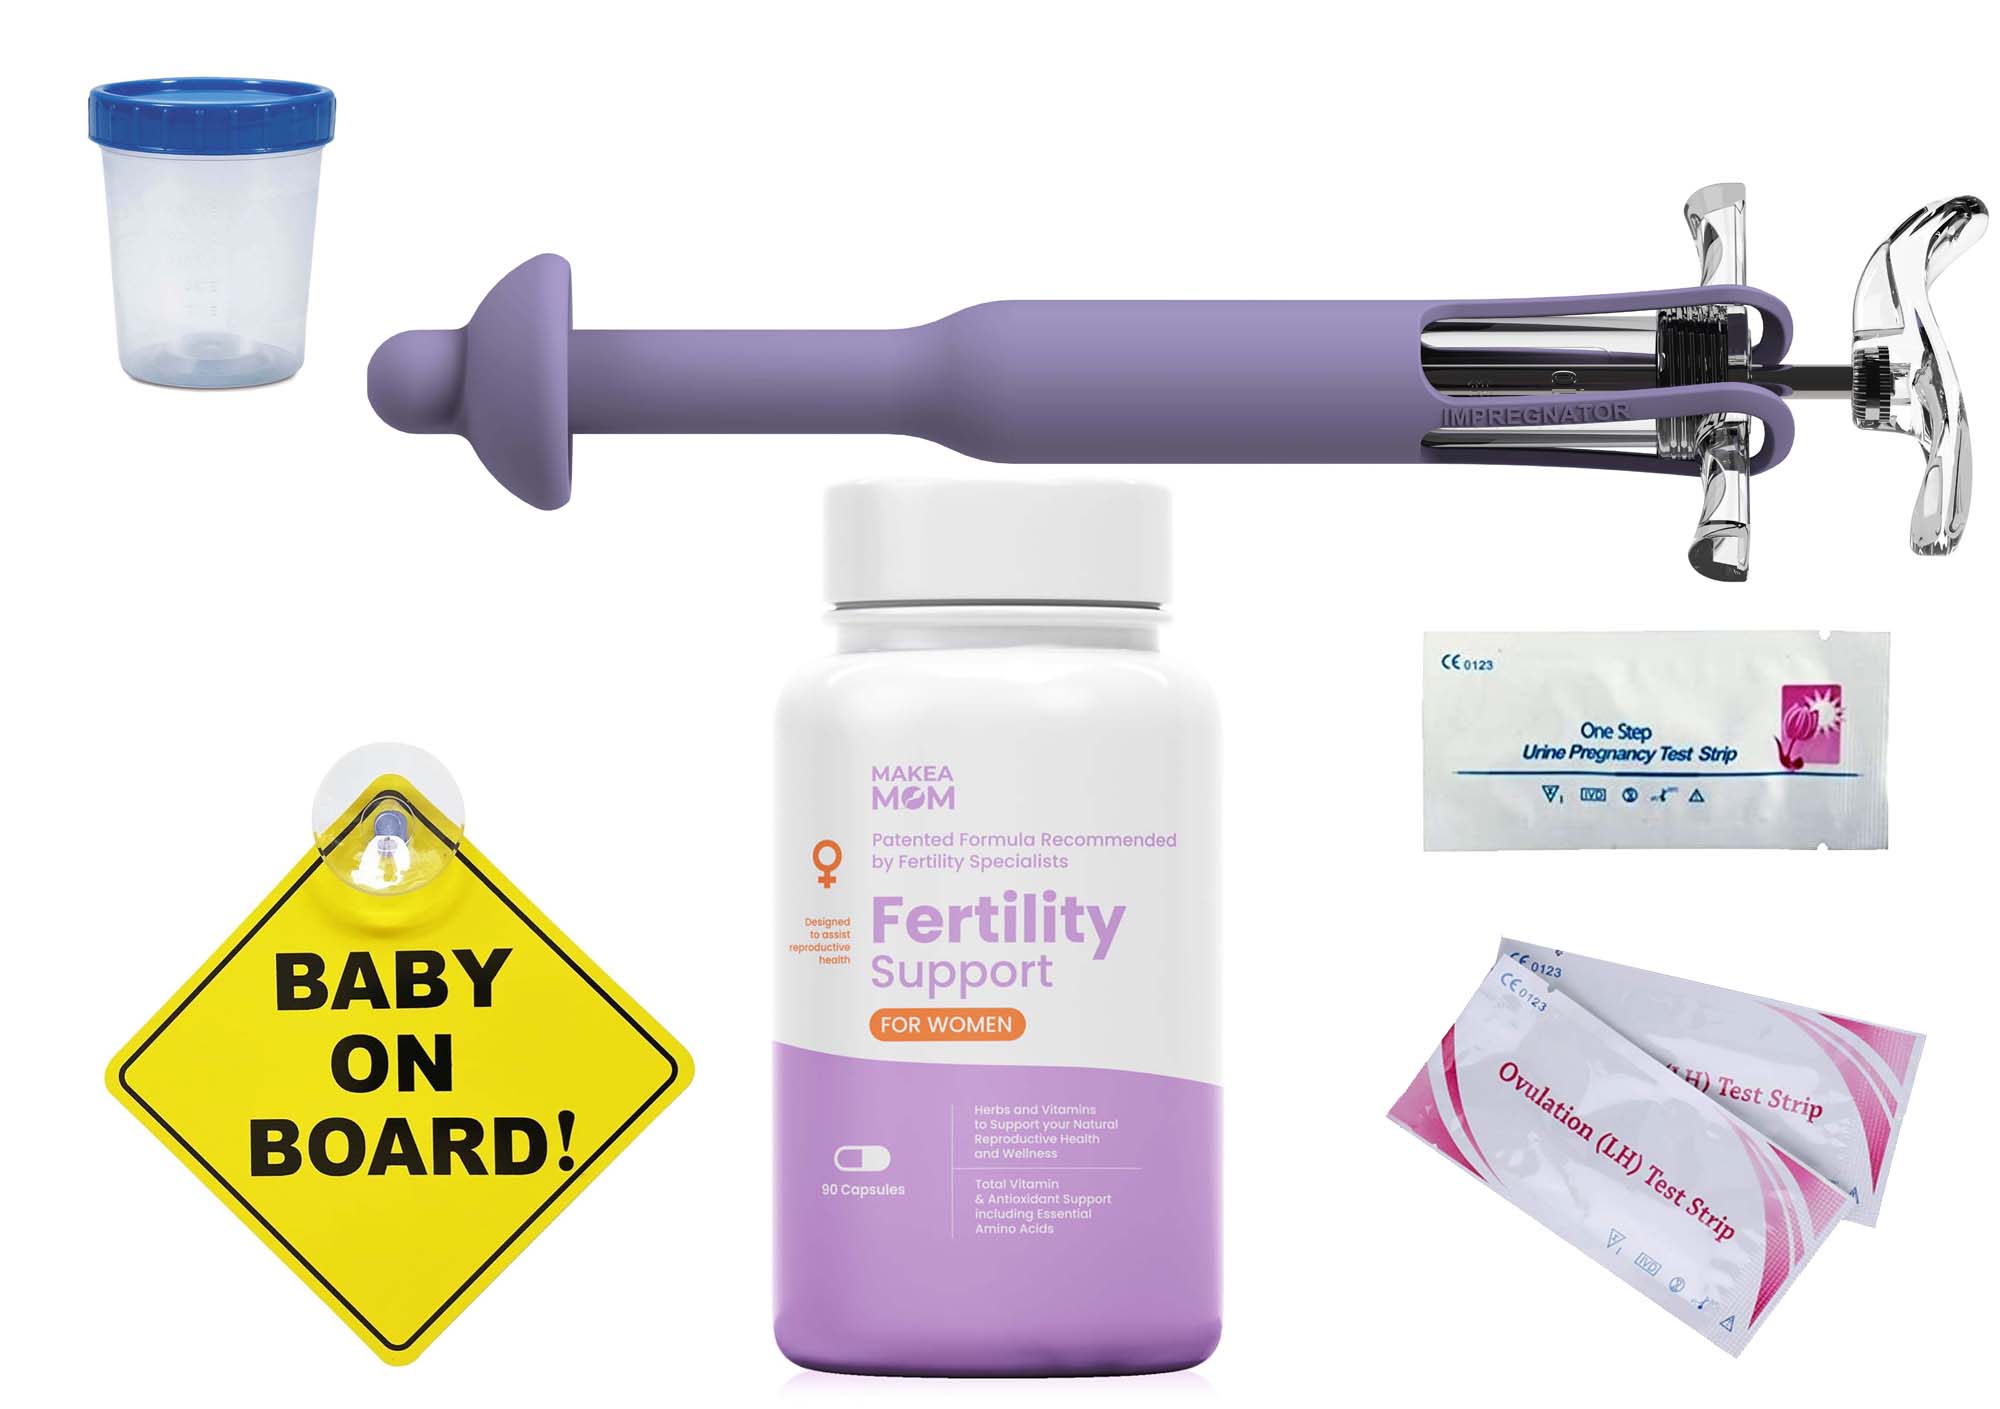 One intracervical insemination syringe kit and a fertility boost supplement on a light background, symbolizing a comprehensive approach to supporting conception.